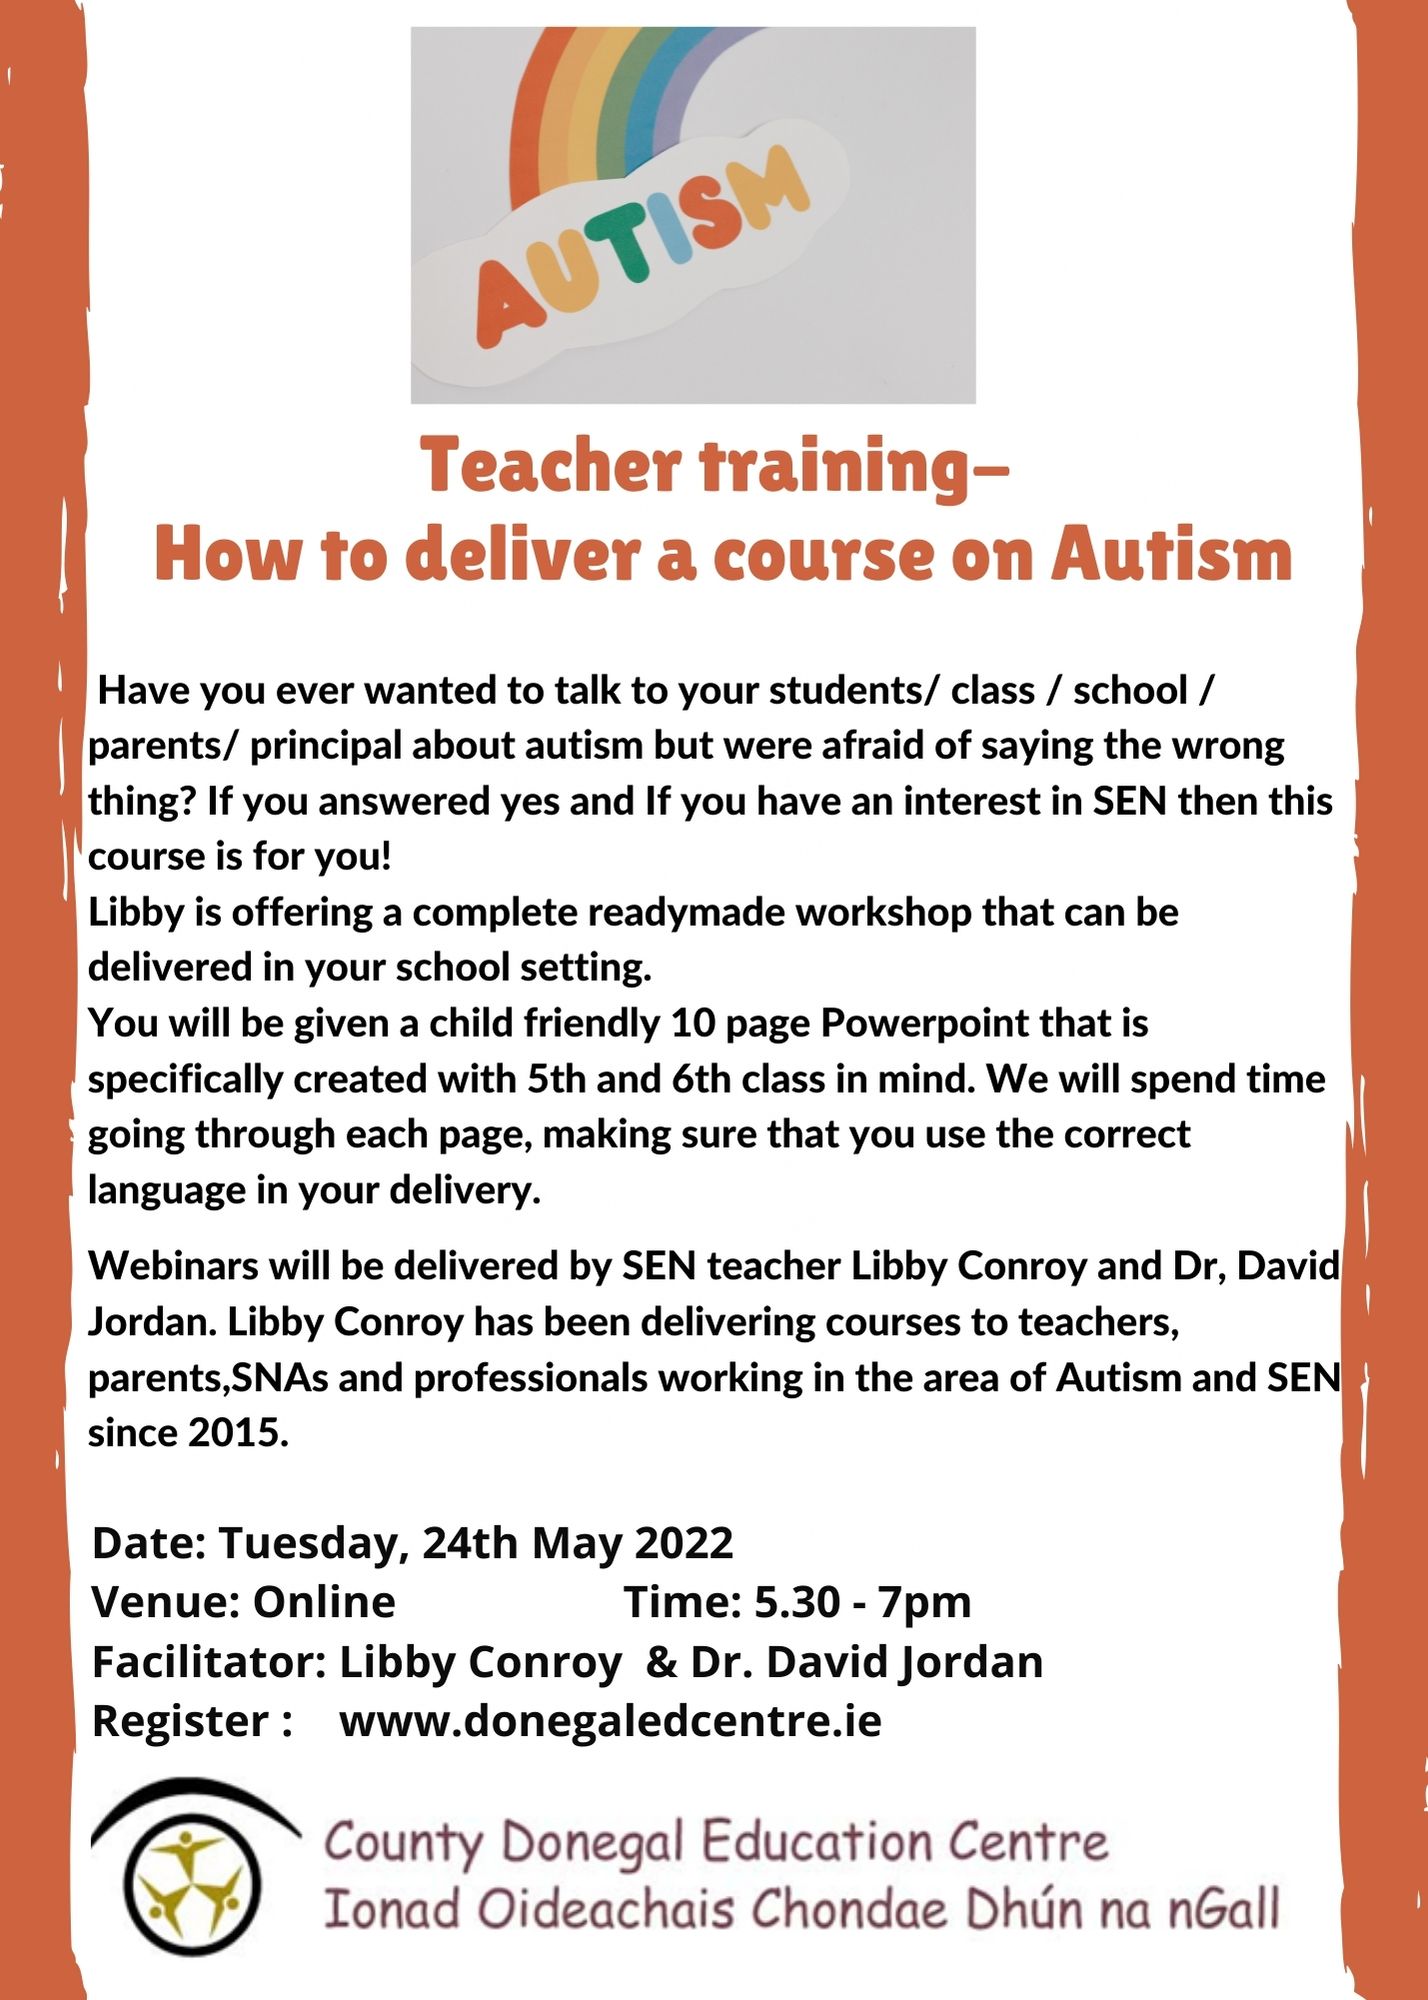 Teacher_training-_How_to_deliver_a_course_on_autism_to_5th_and_6th_class.jpg